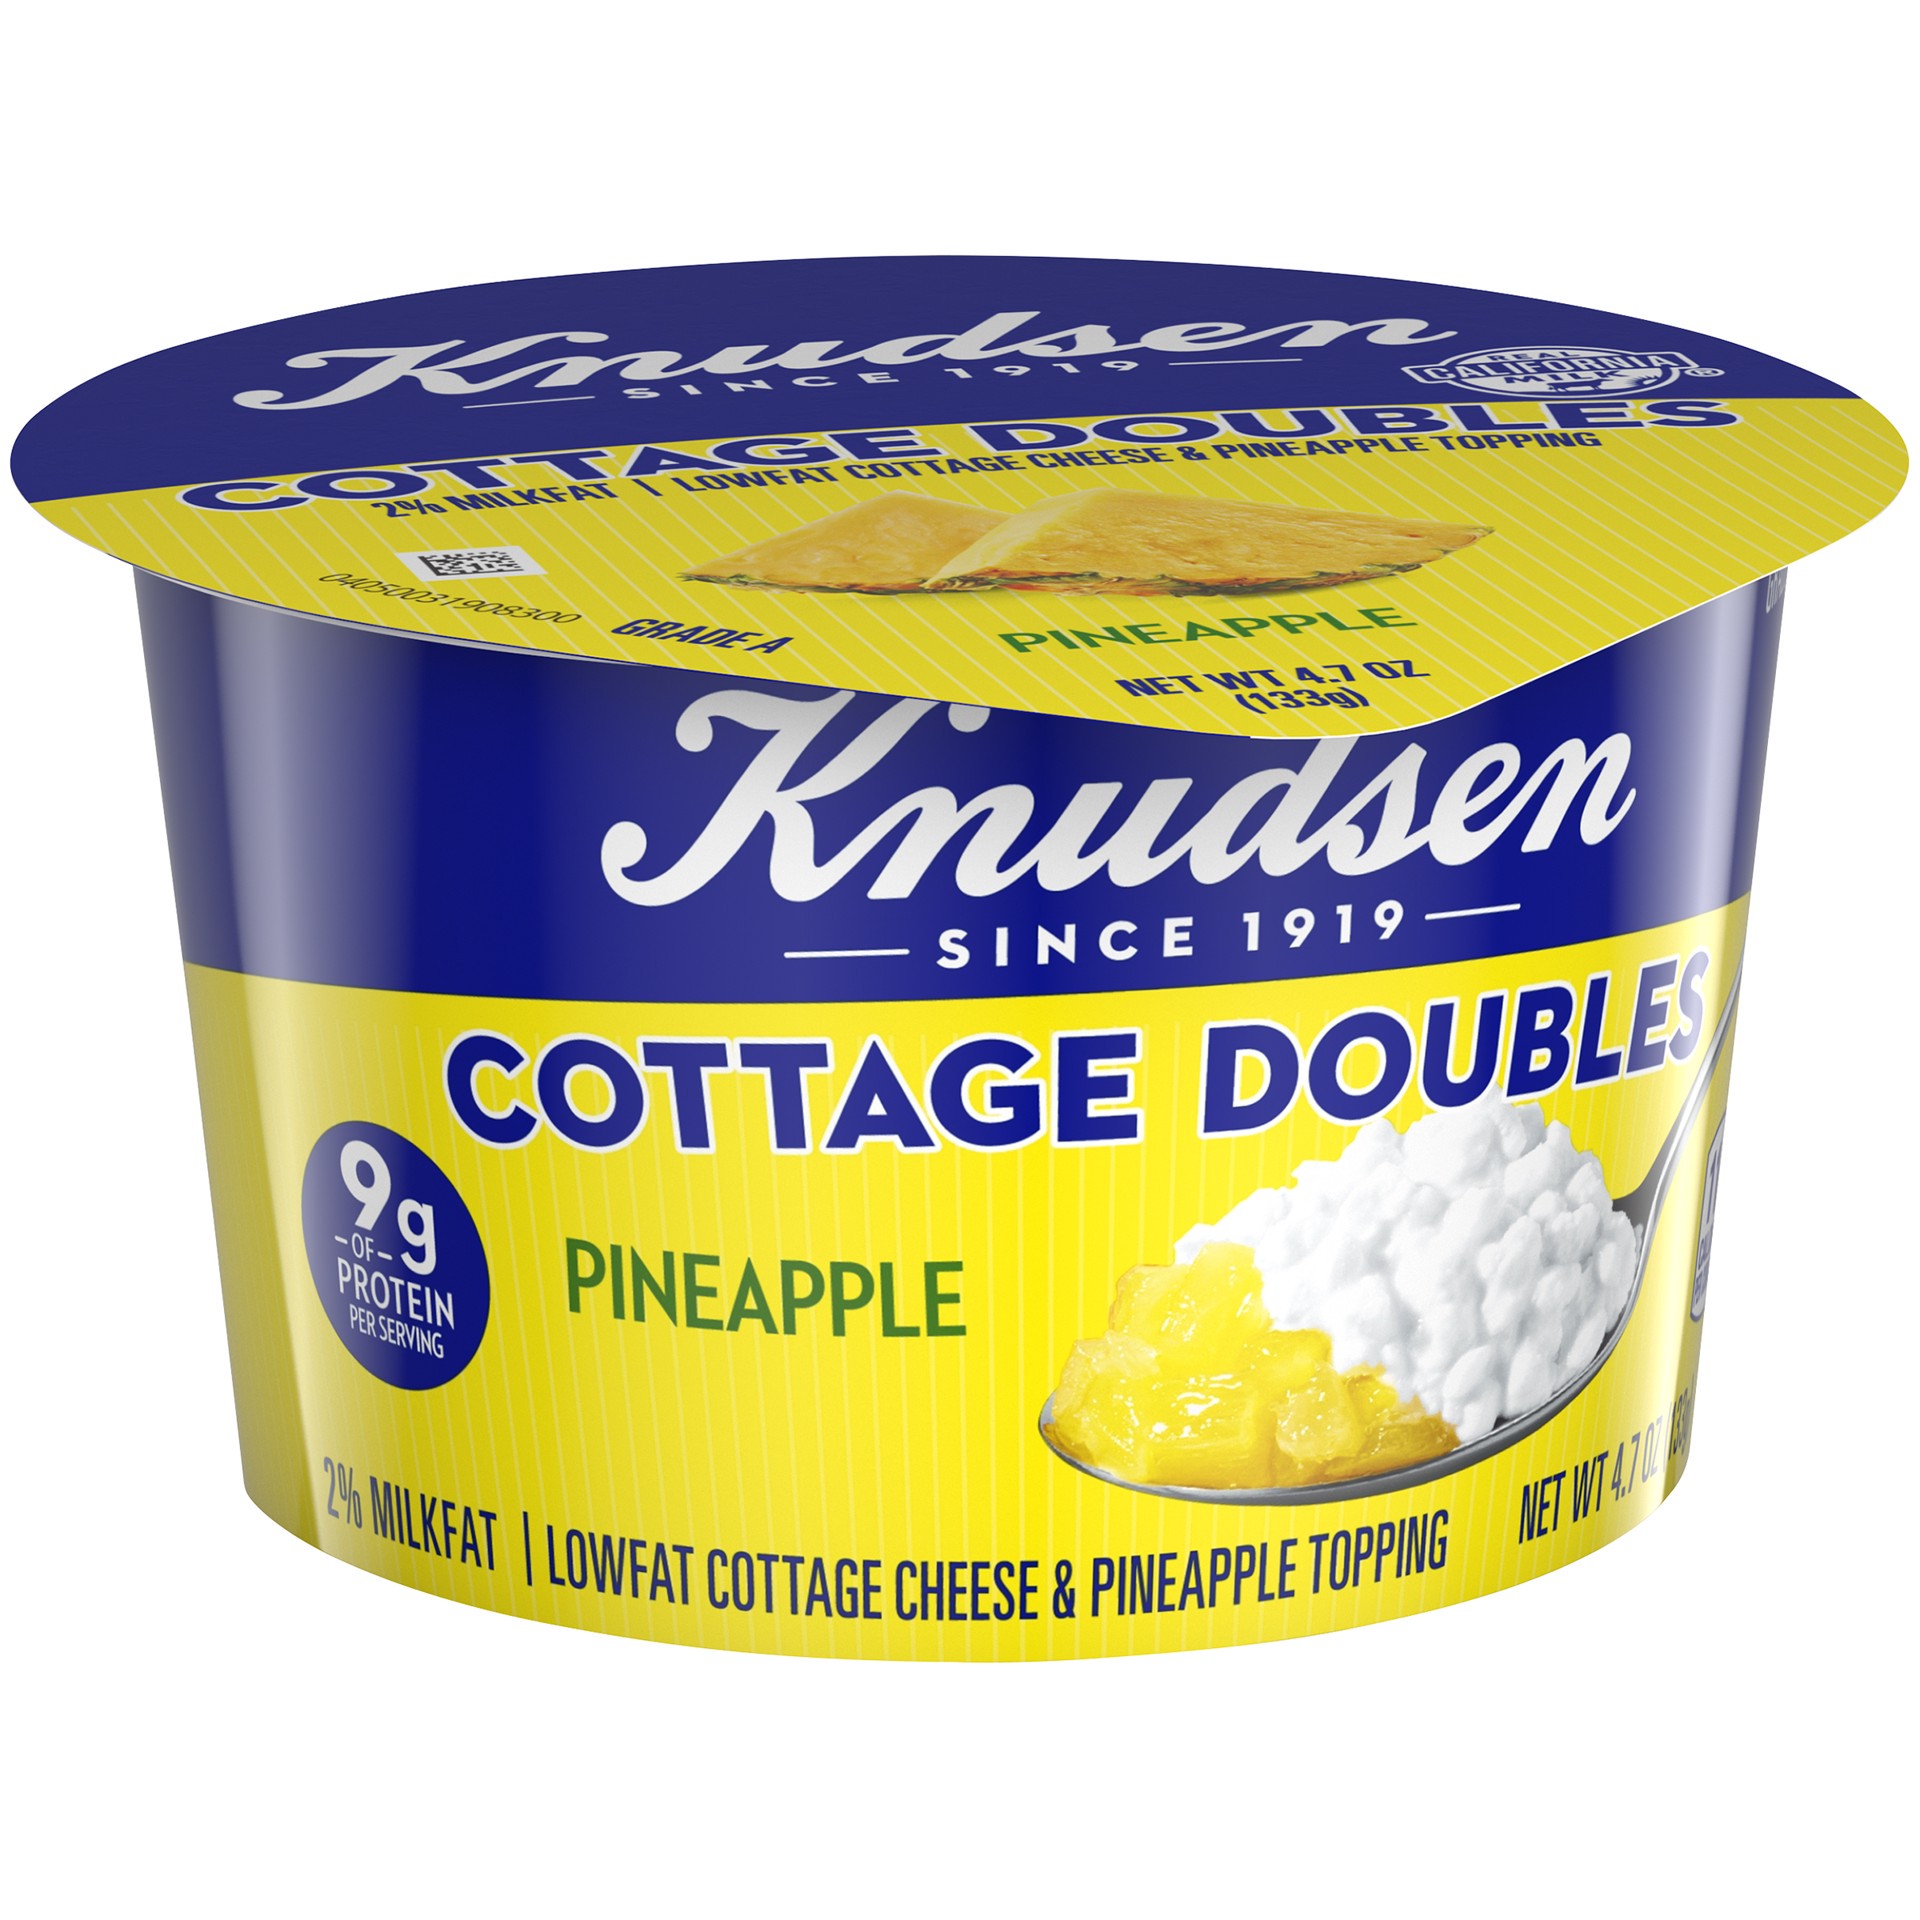 slide 2 of 6, Knudsen Cottage Doubles Lowfat Cottage Cheese & Pineapple Topping with 2% Milkfat Cup, 4.7 oz